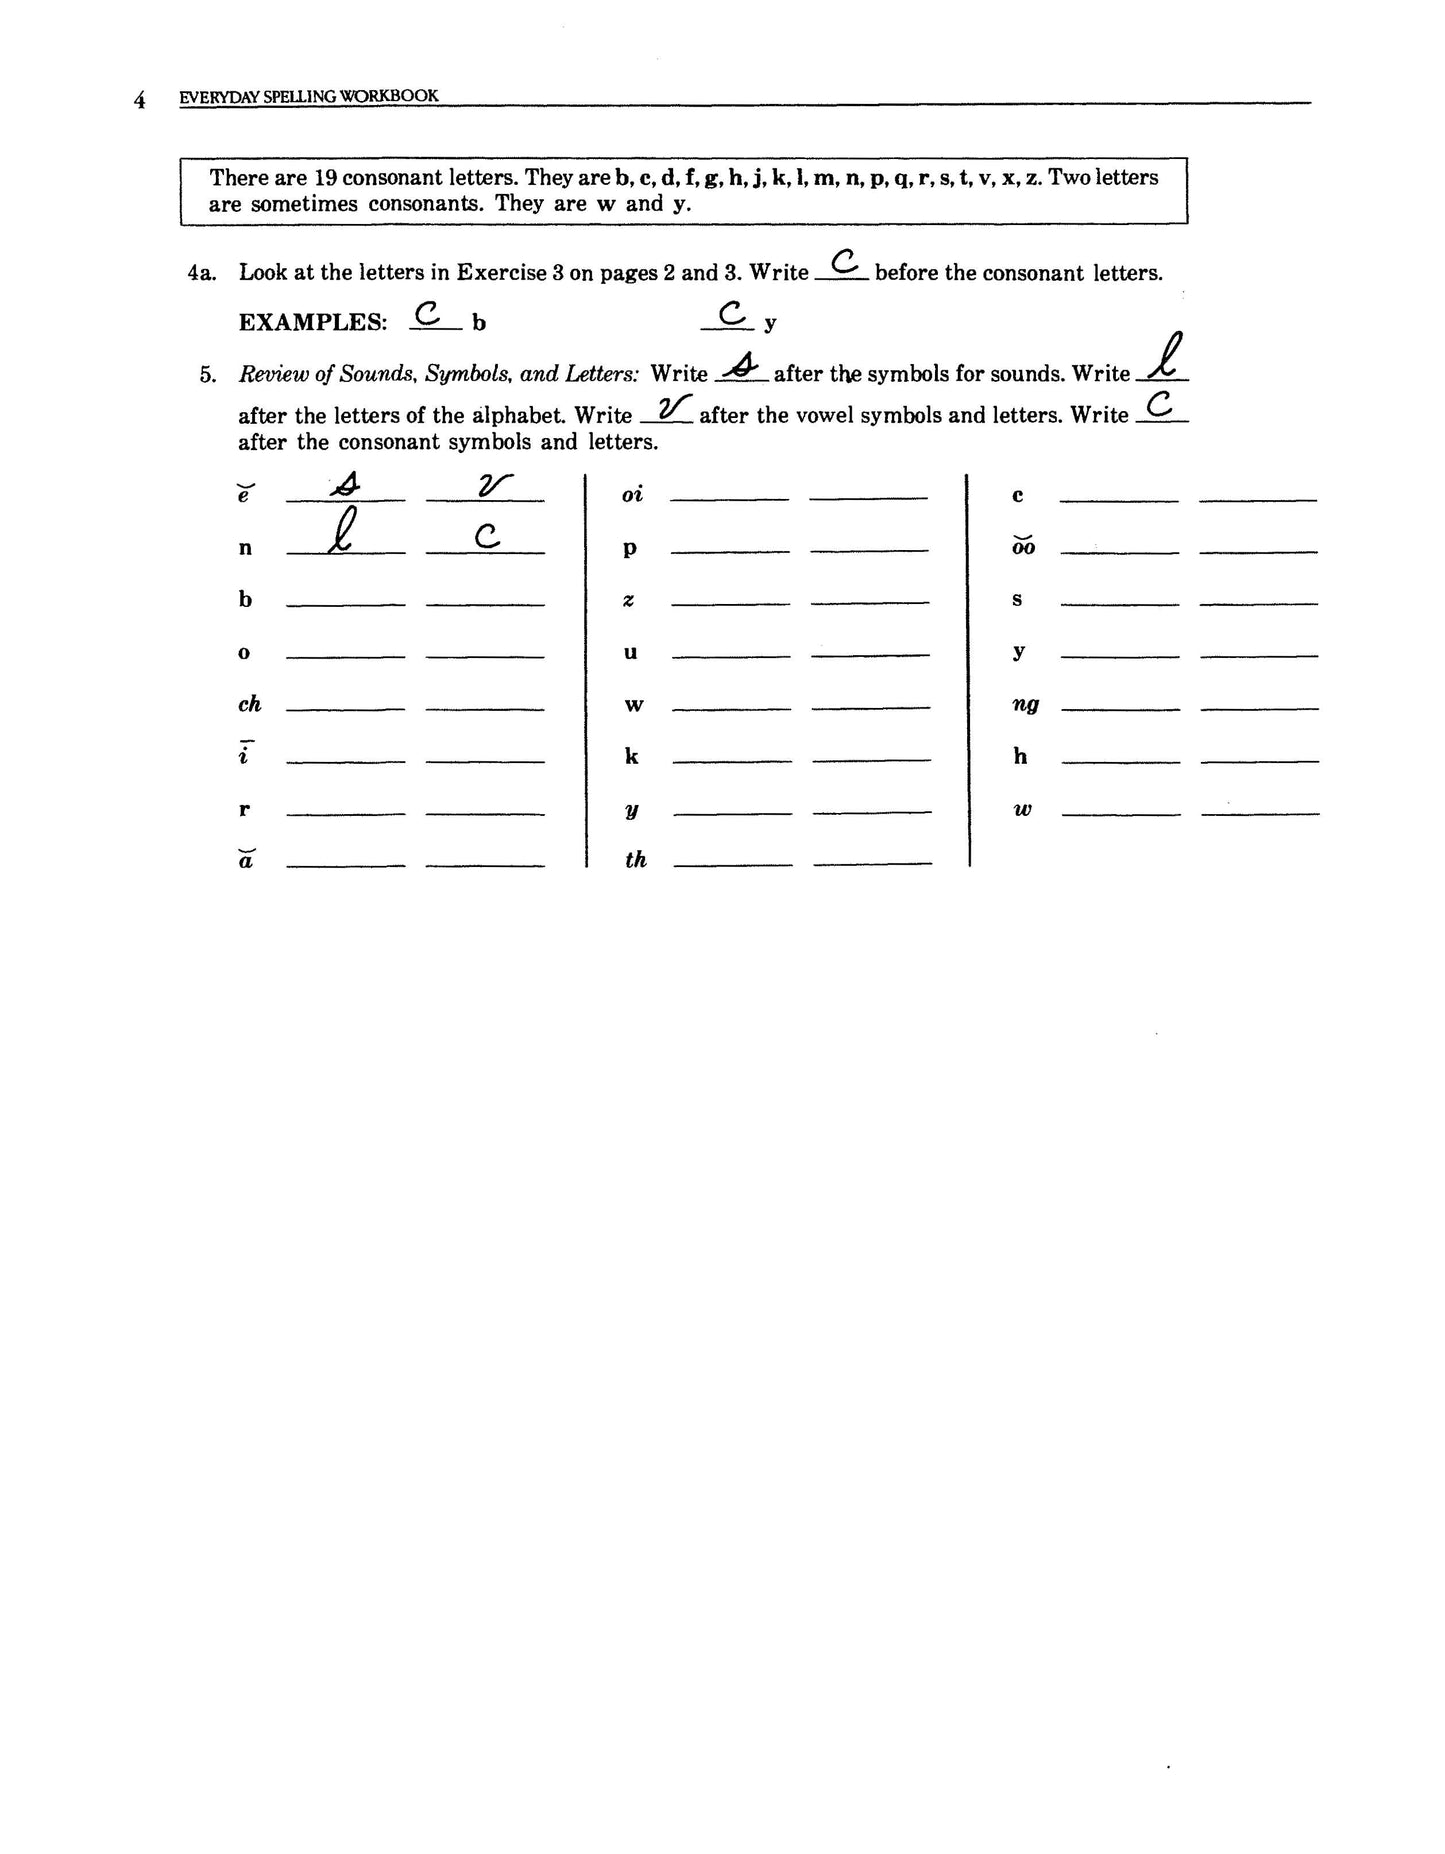 A-09.2 Do Traditional Student Text Exercises